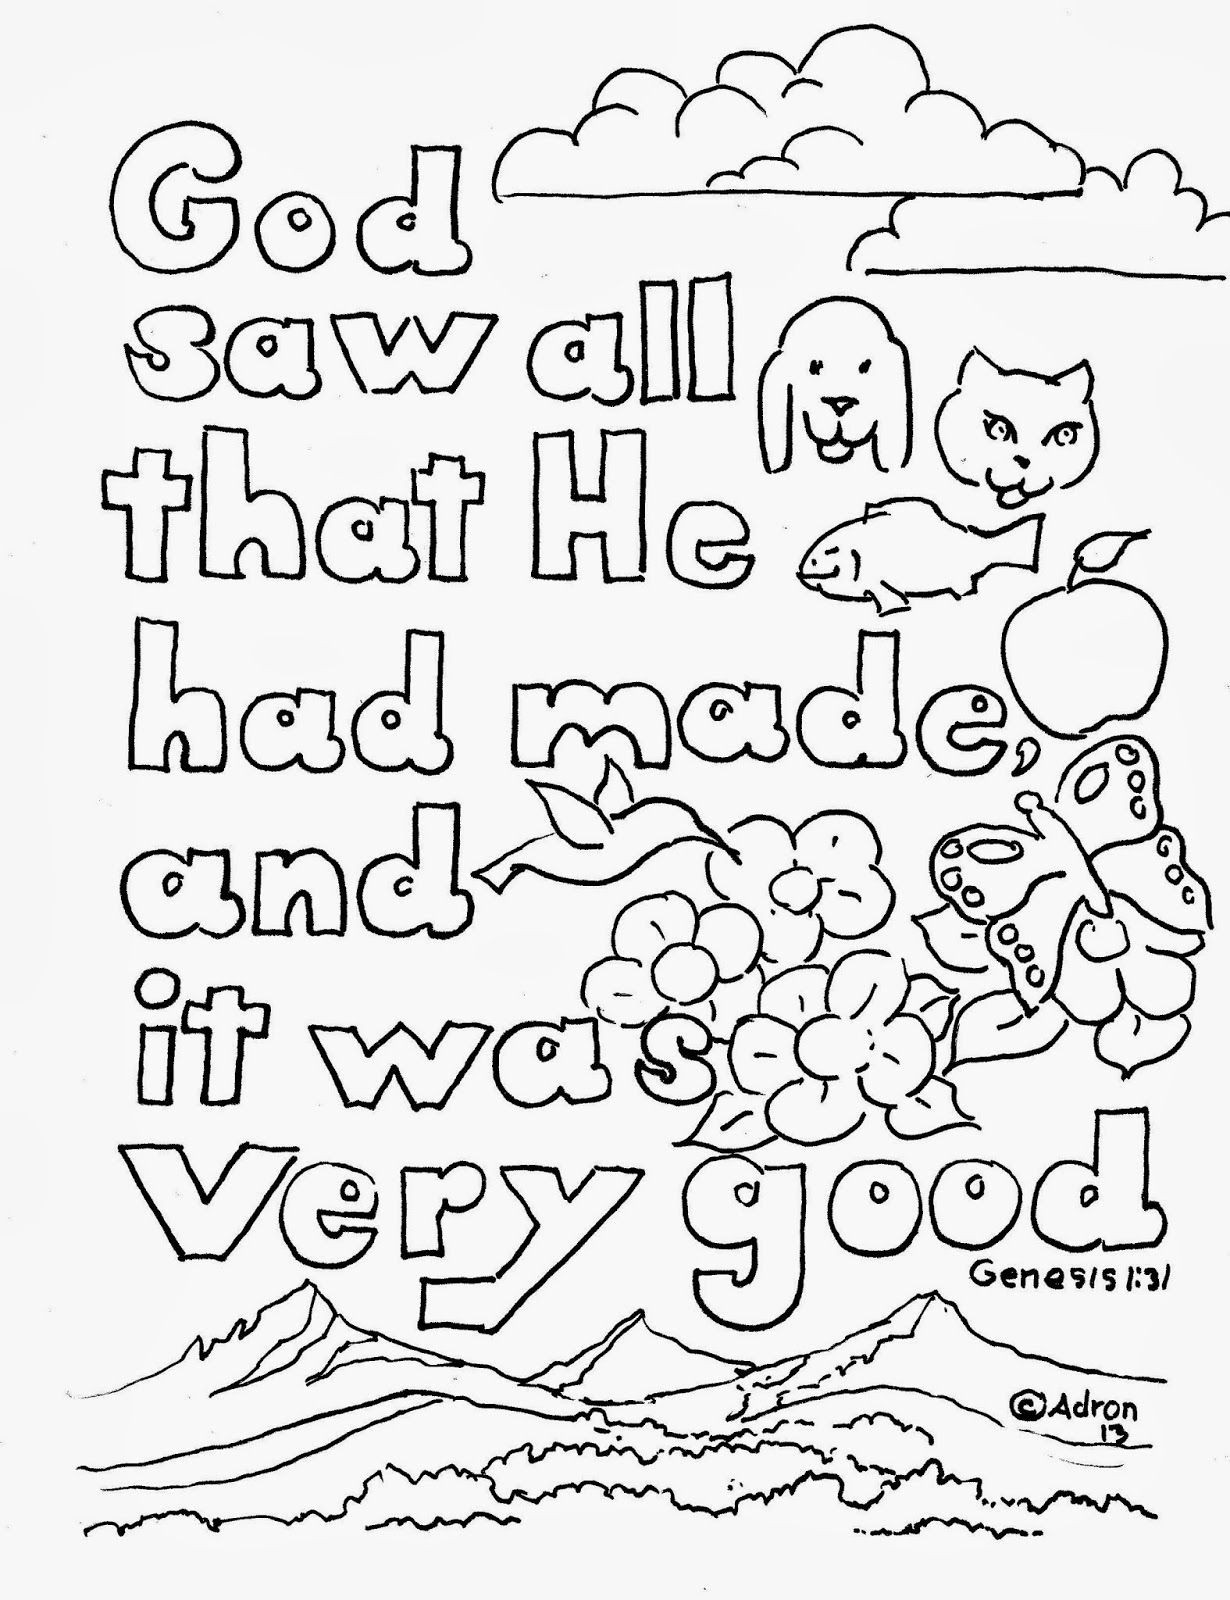 Bible Verse Coloring Pages For Toddlers
 Coloring Pages for Kids by Mr Adron Bible Verse